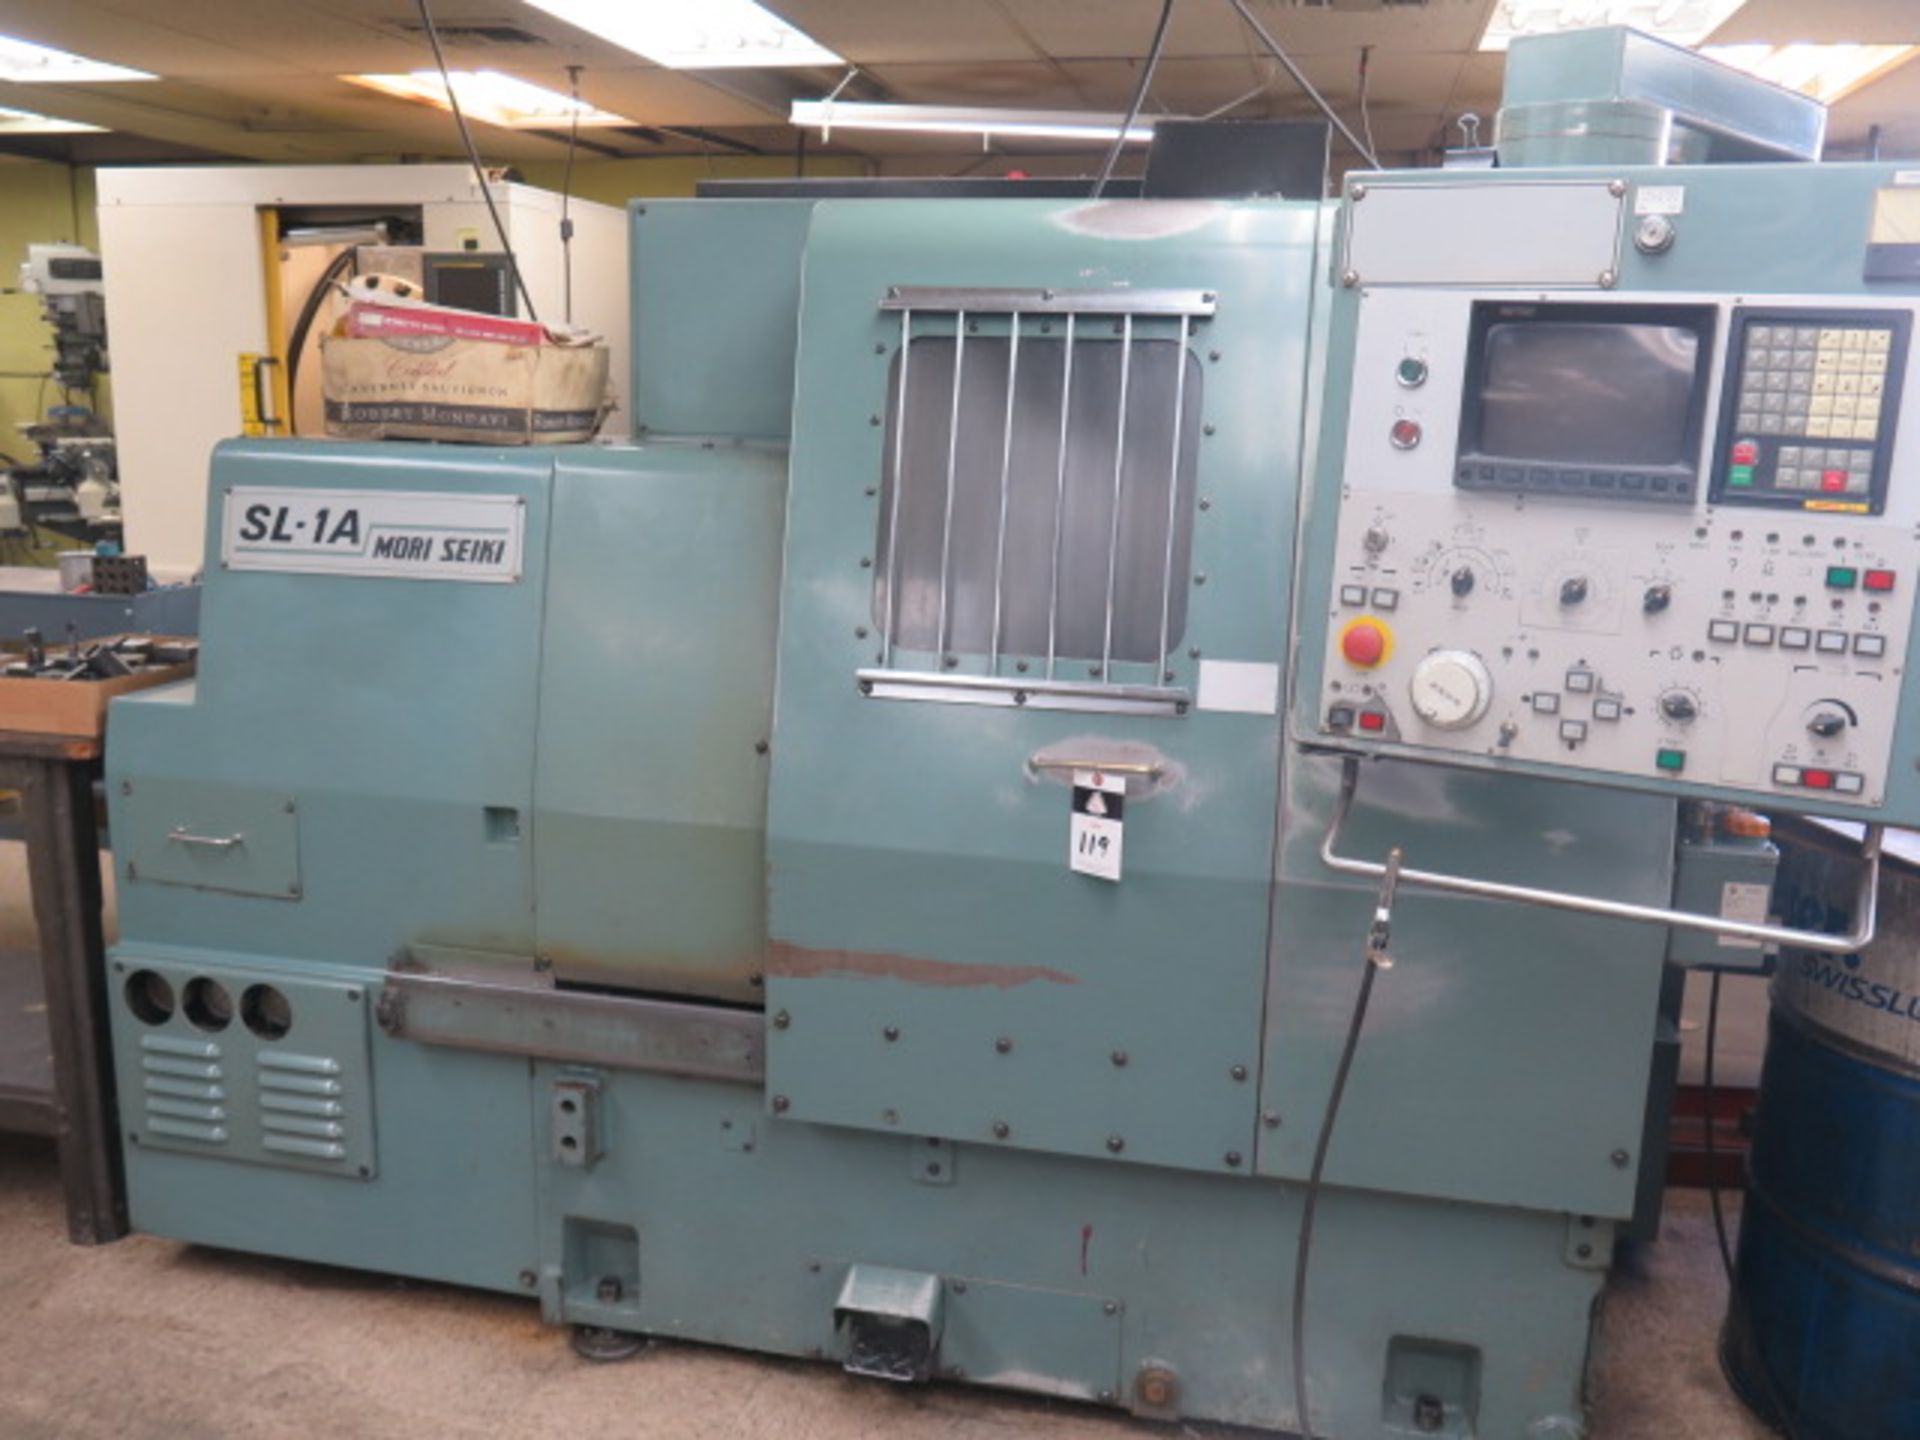 Mori Seiki SL-1A CNC Turning Center s/n 836 w/ Fanuc 10T Controls, 12-Station Turret, SOLD AS IS